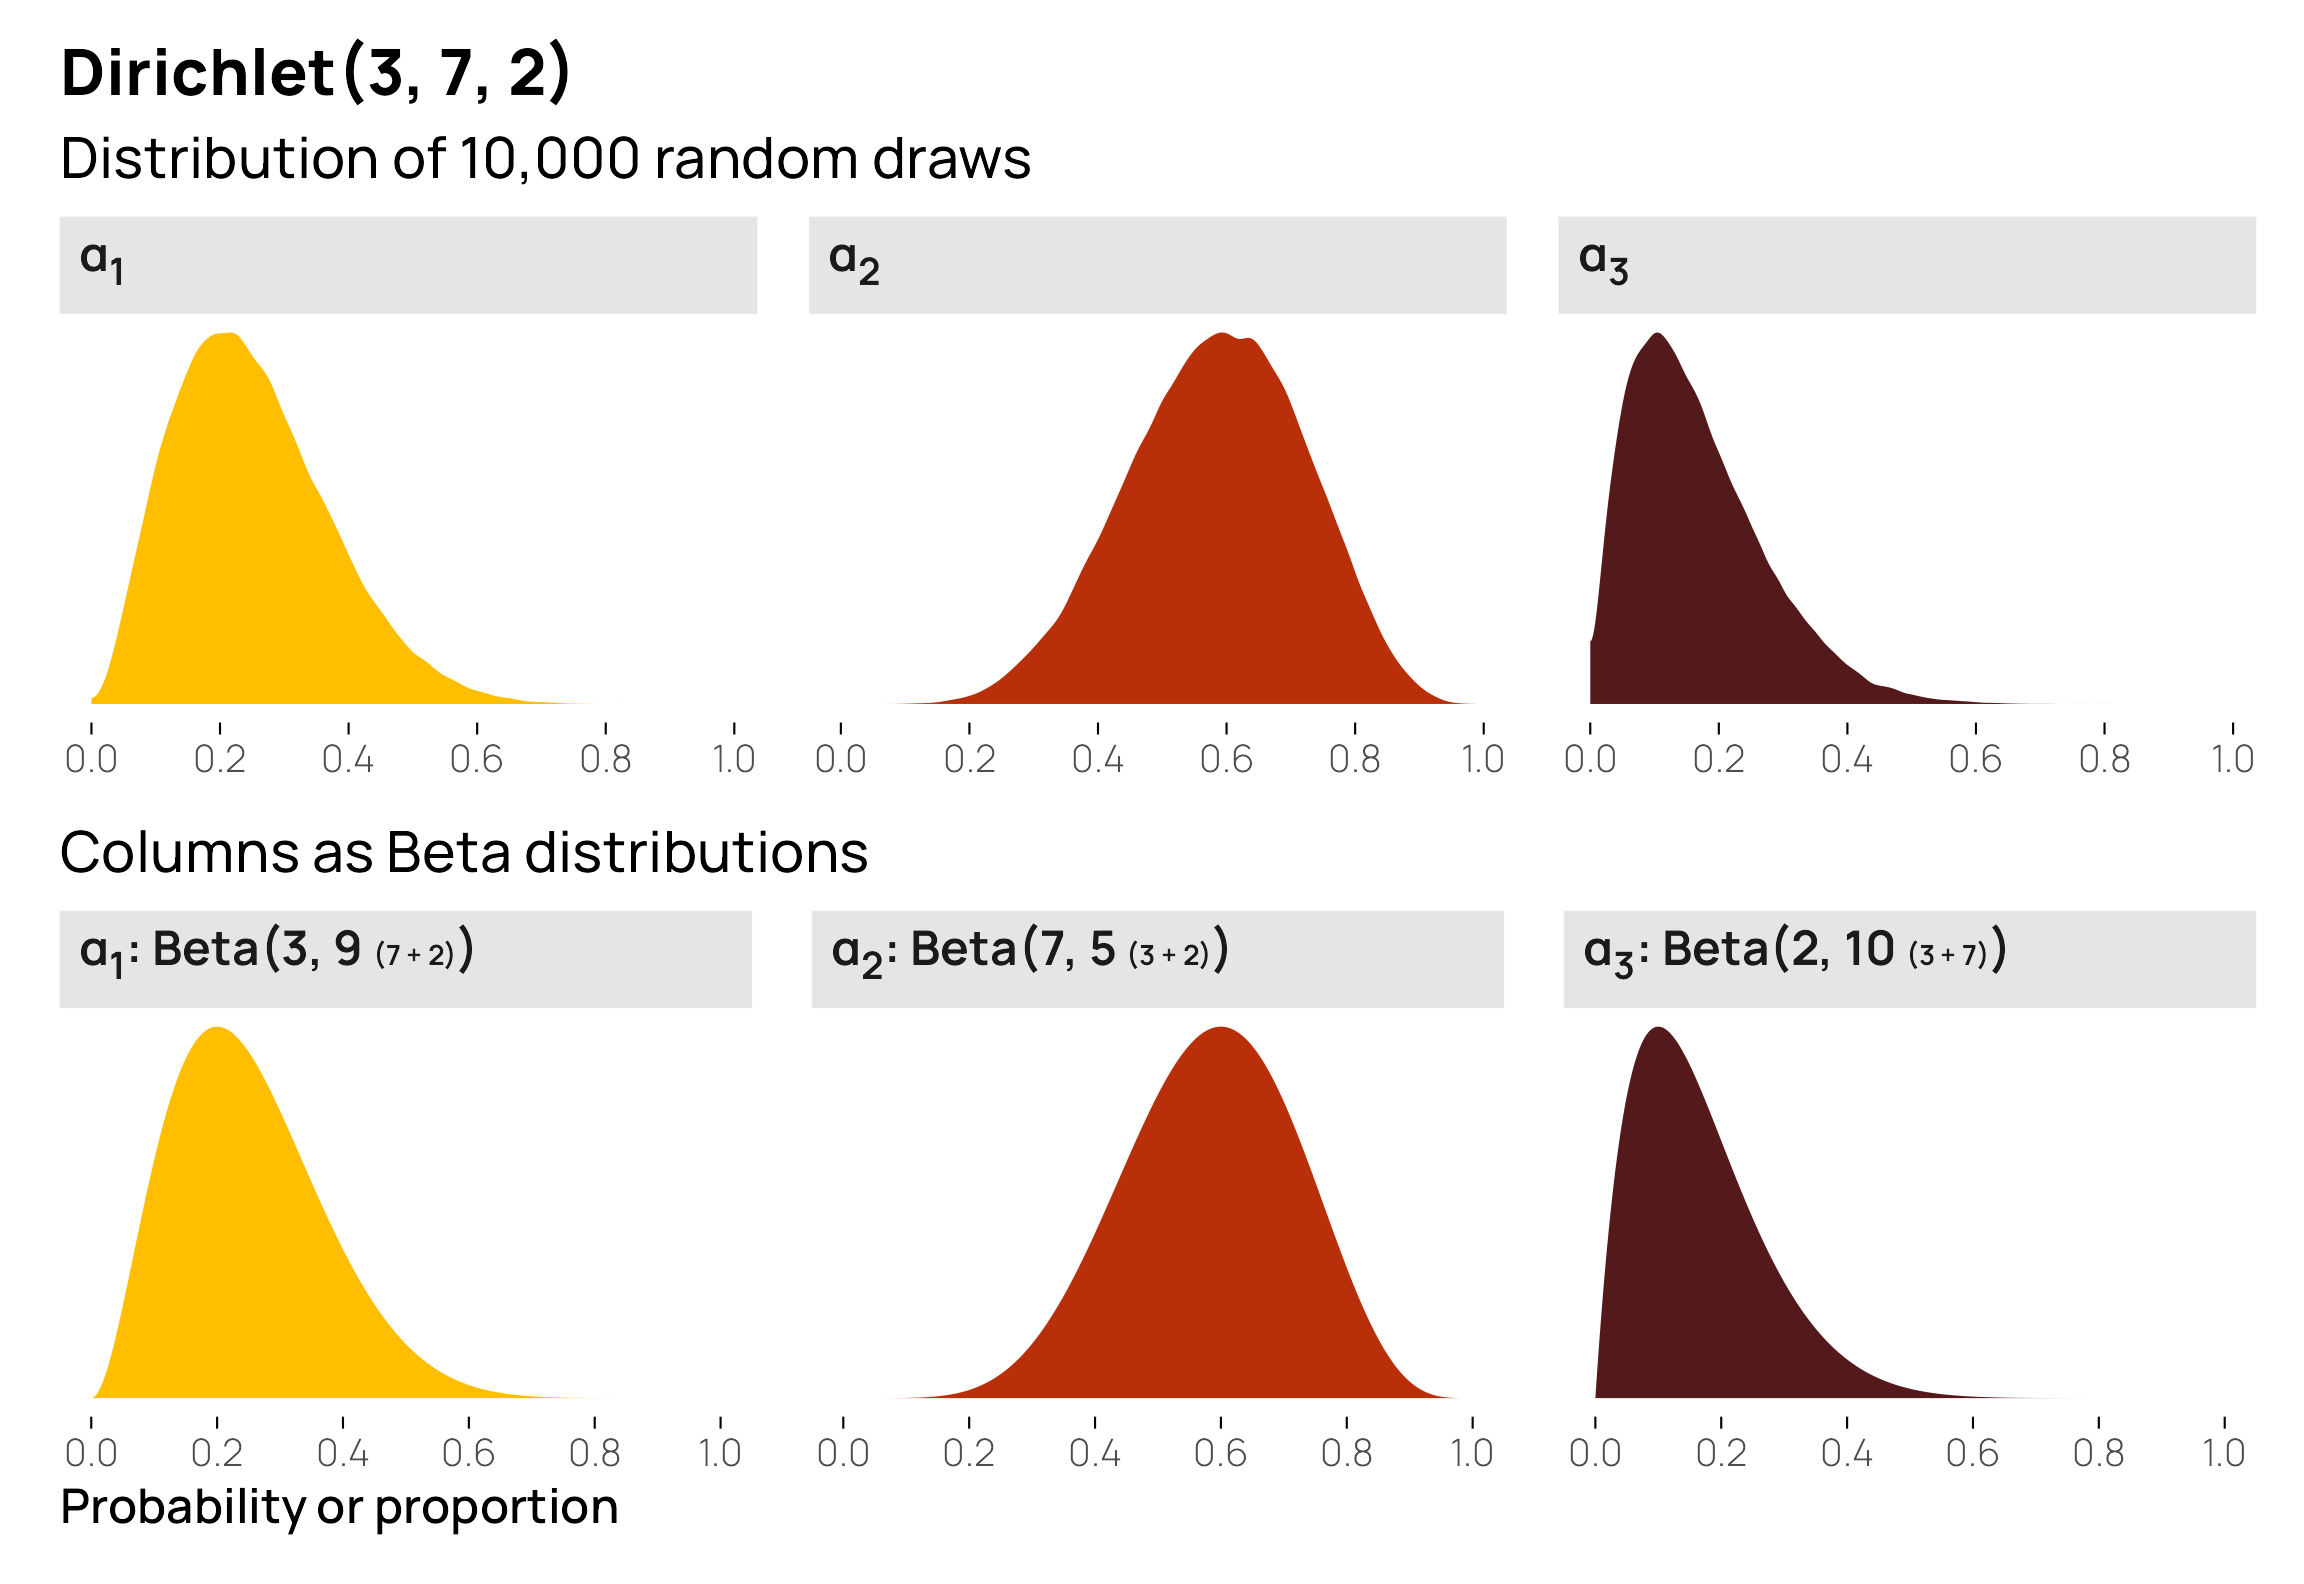 Guide to understanding the intuition behind the Dirichlet distribution